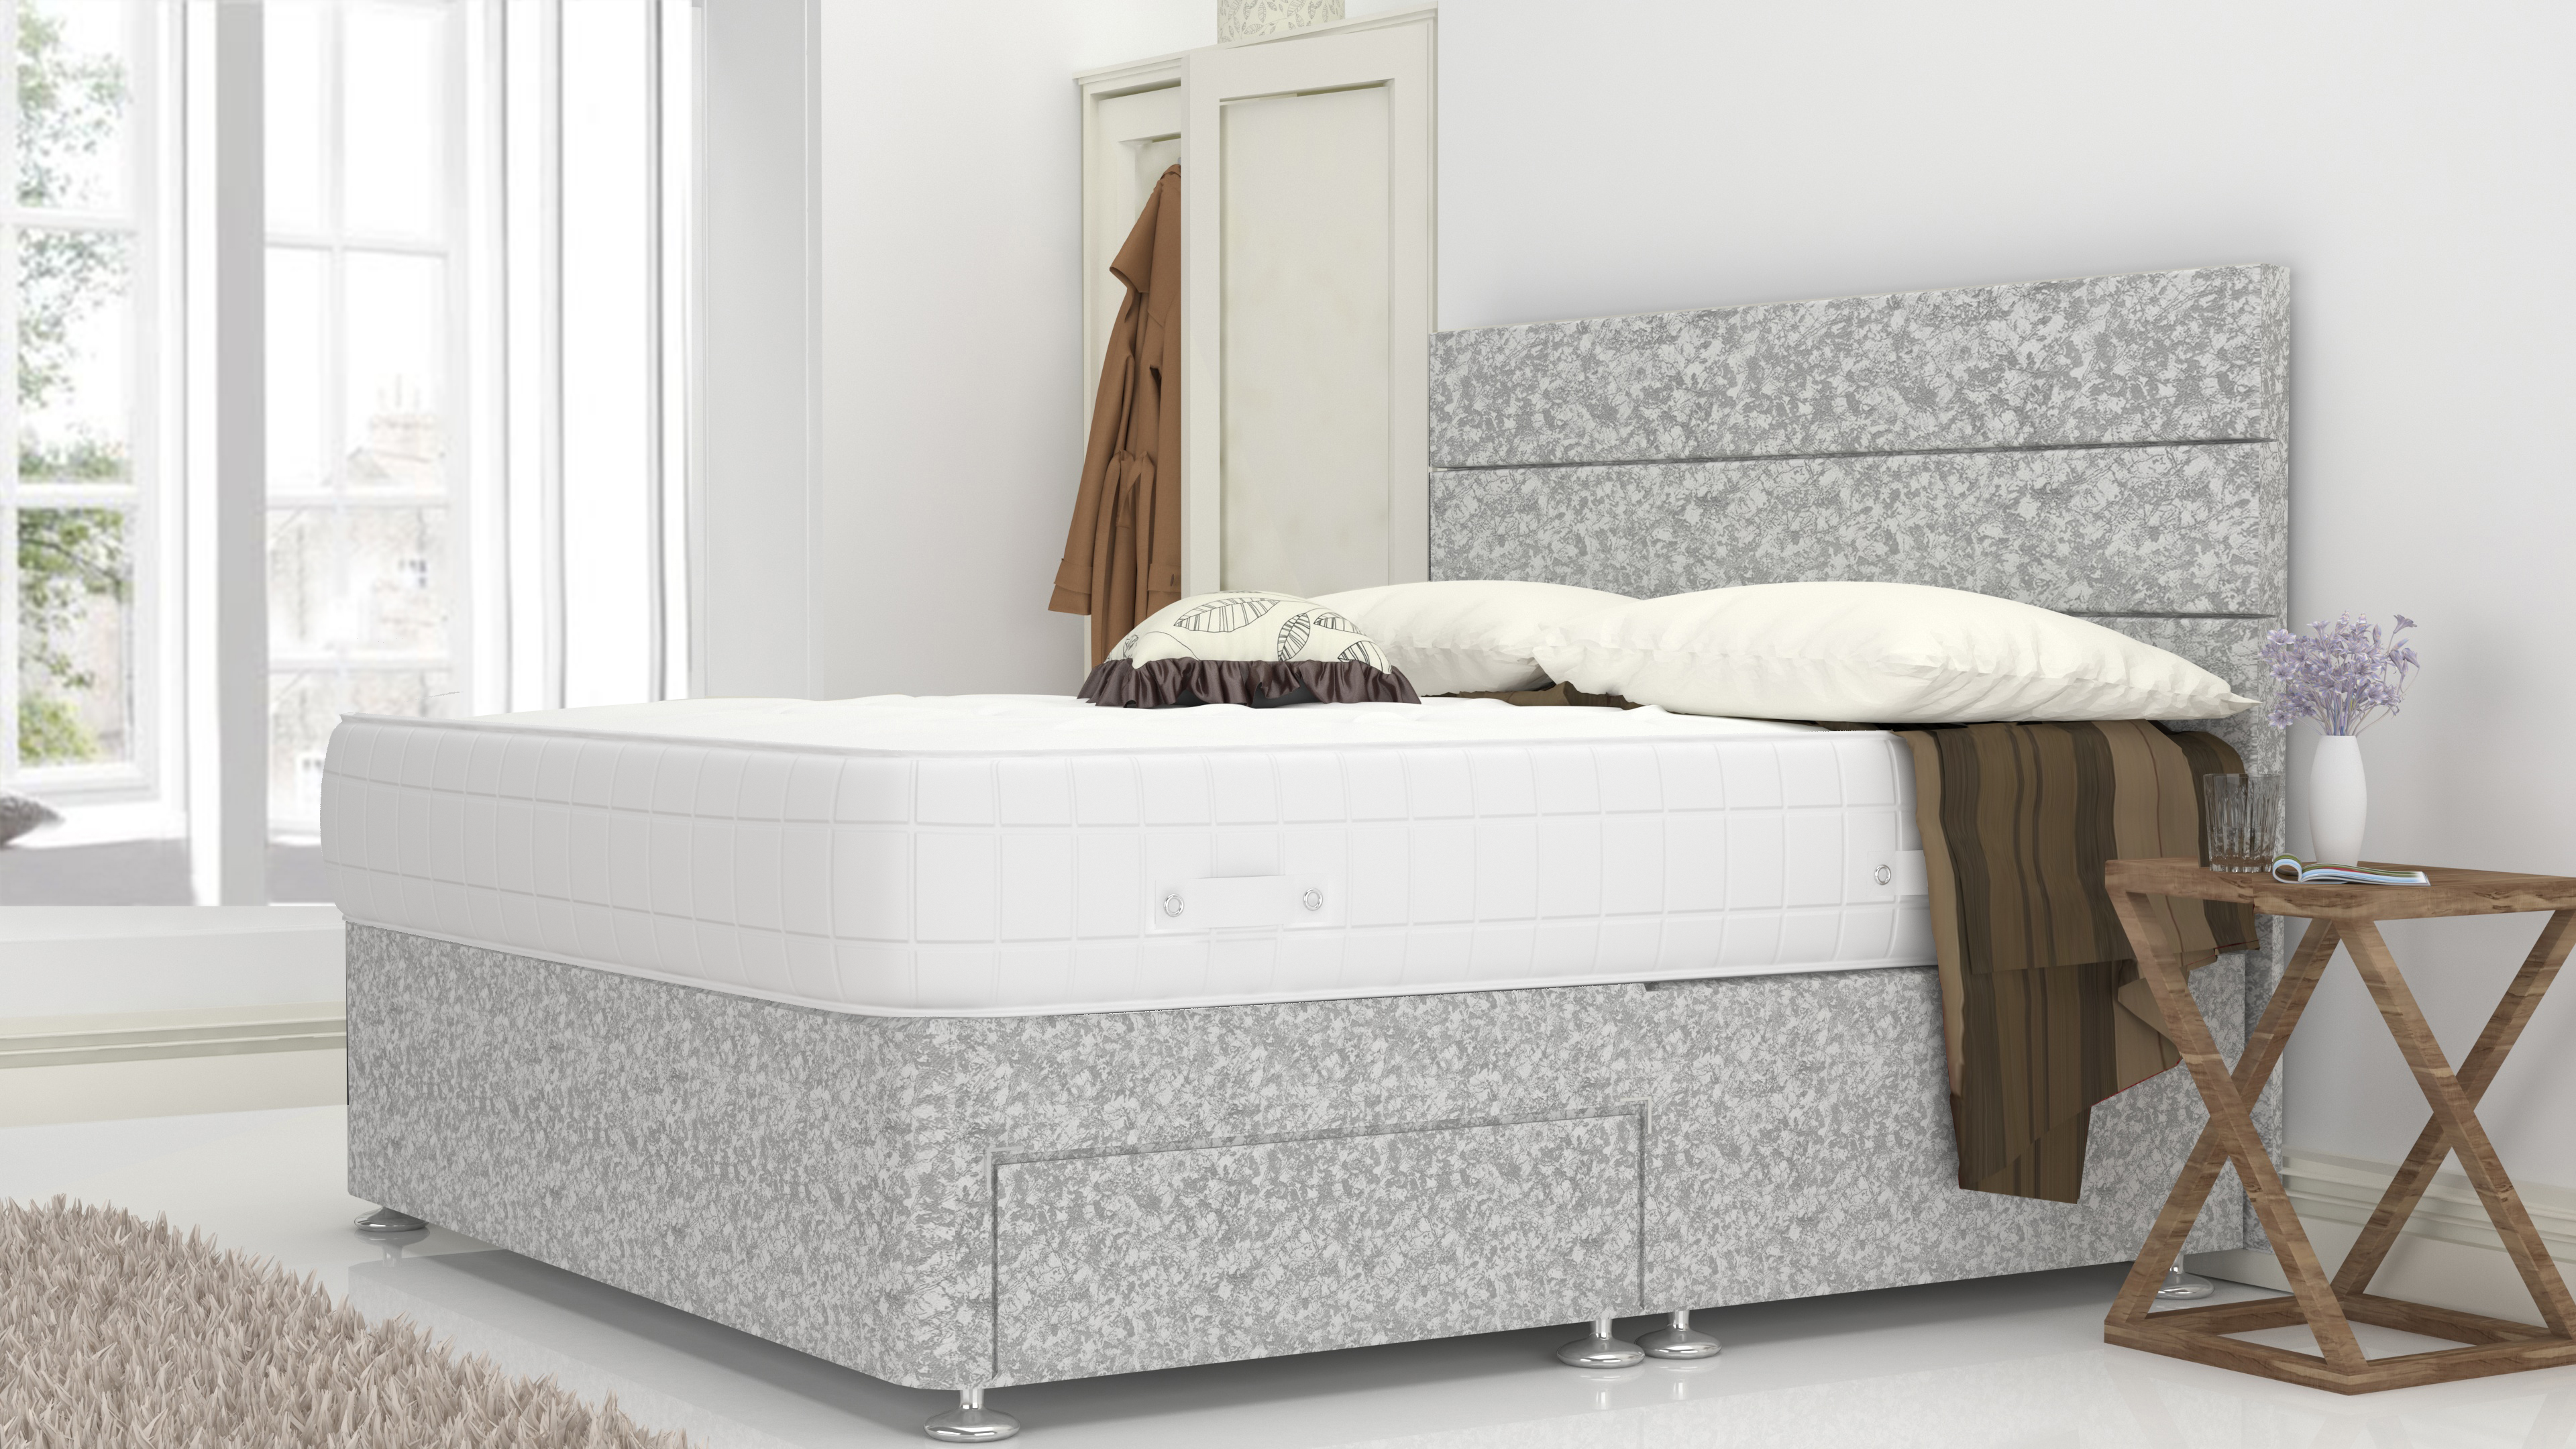 Silver Crushed 4 Feet Divan Bed Set With 3 Panel Headboard (Included Feet) And Free Pillow Top Mattress